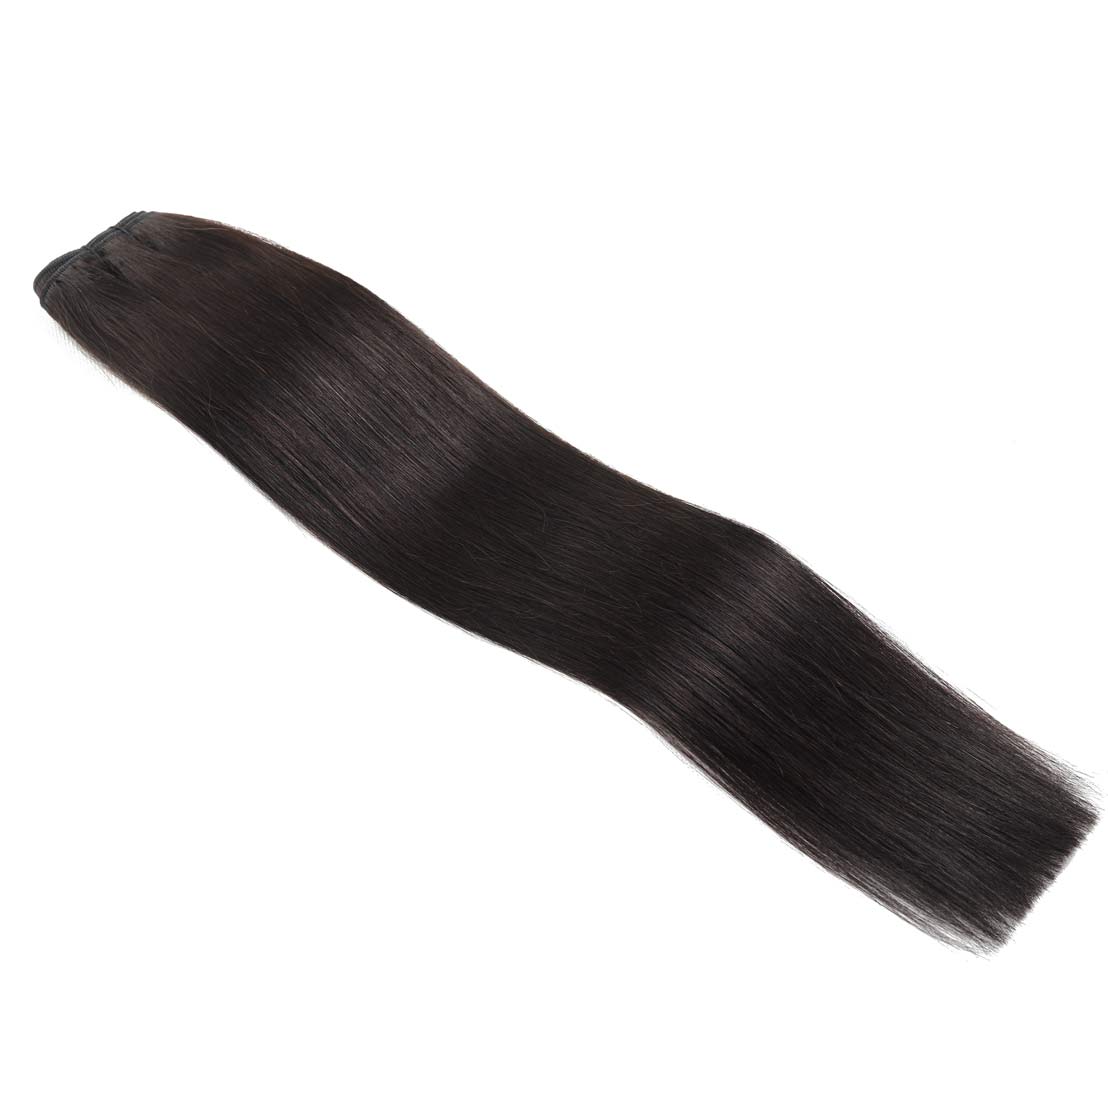 Weft Hair Extensions #1b Natural Black 21”